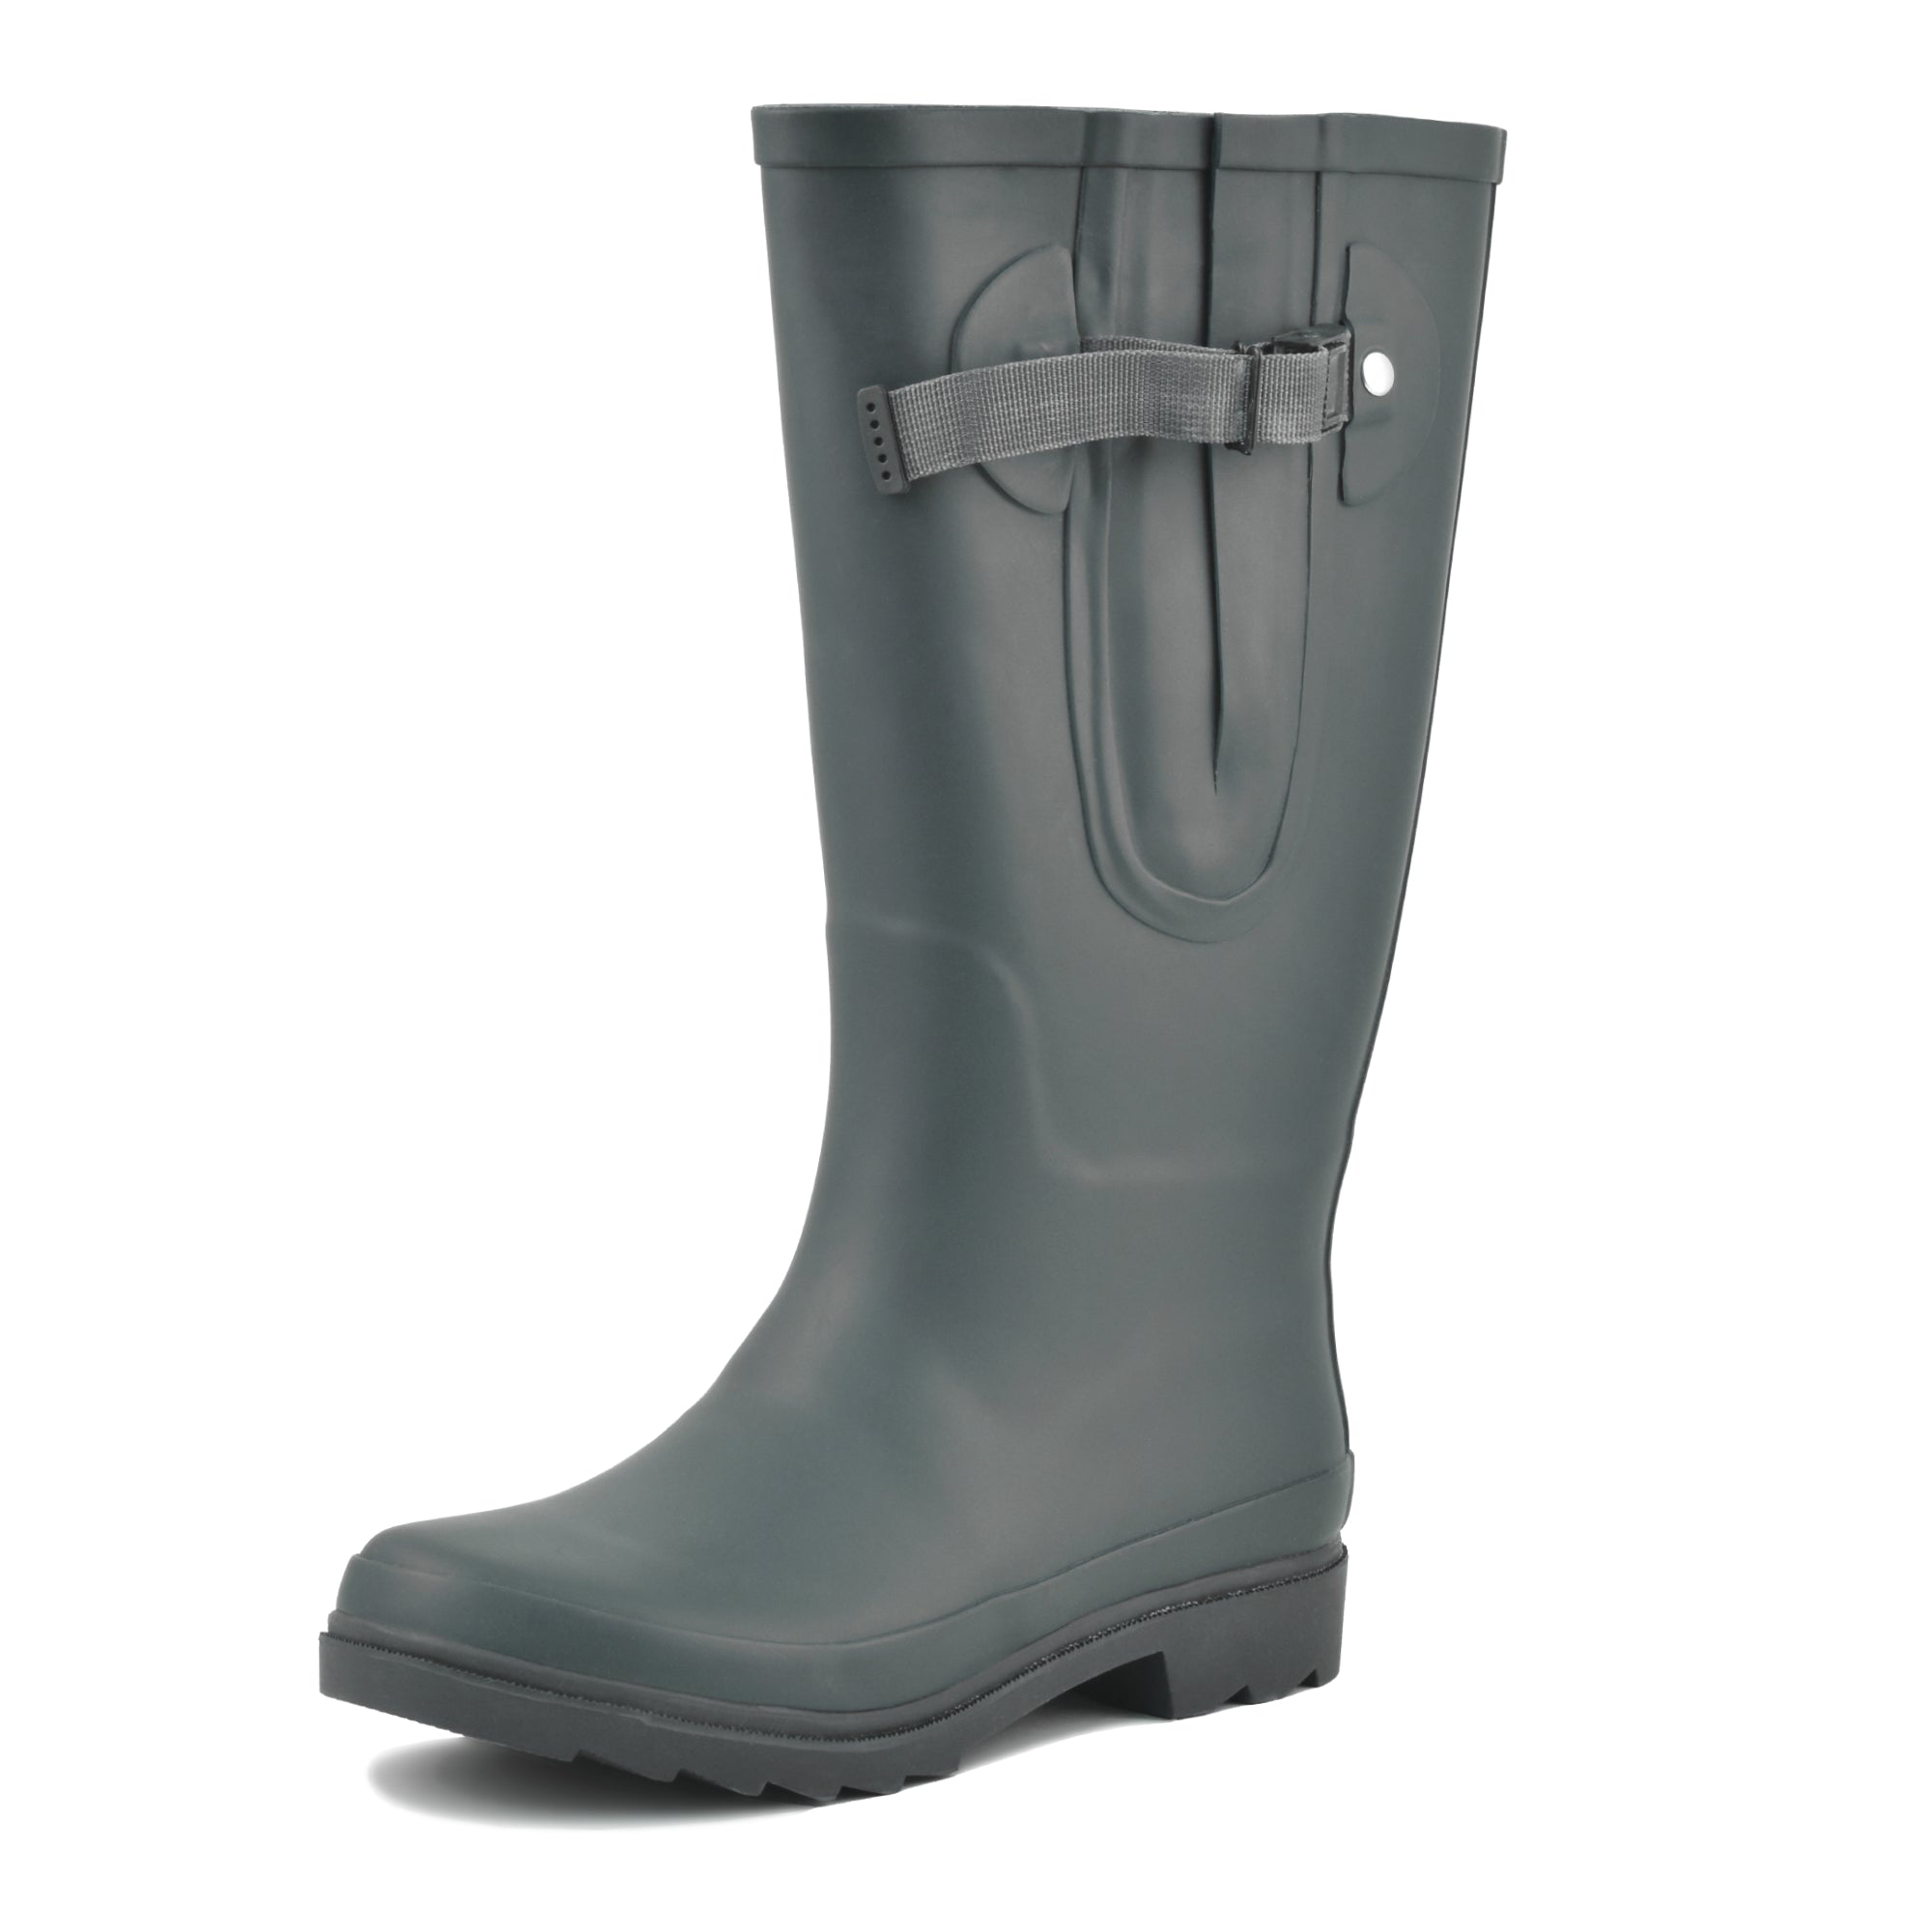 Grey Green Unisex Wide Calf Wellies – up to 50cm calf – The Wide Welly ...